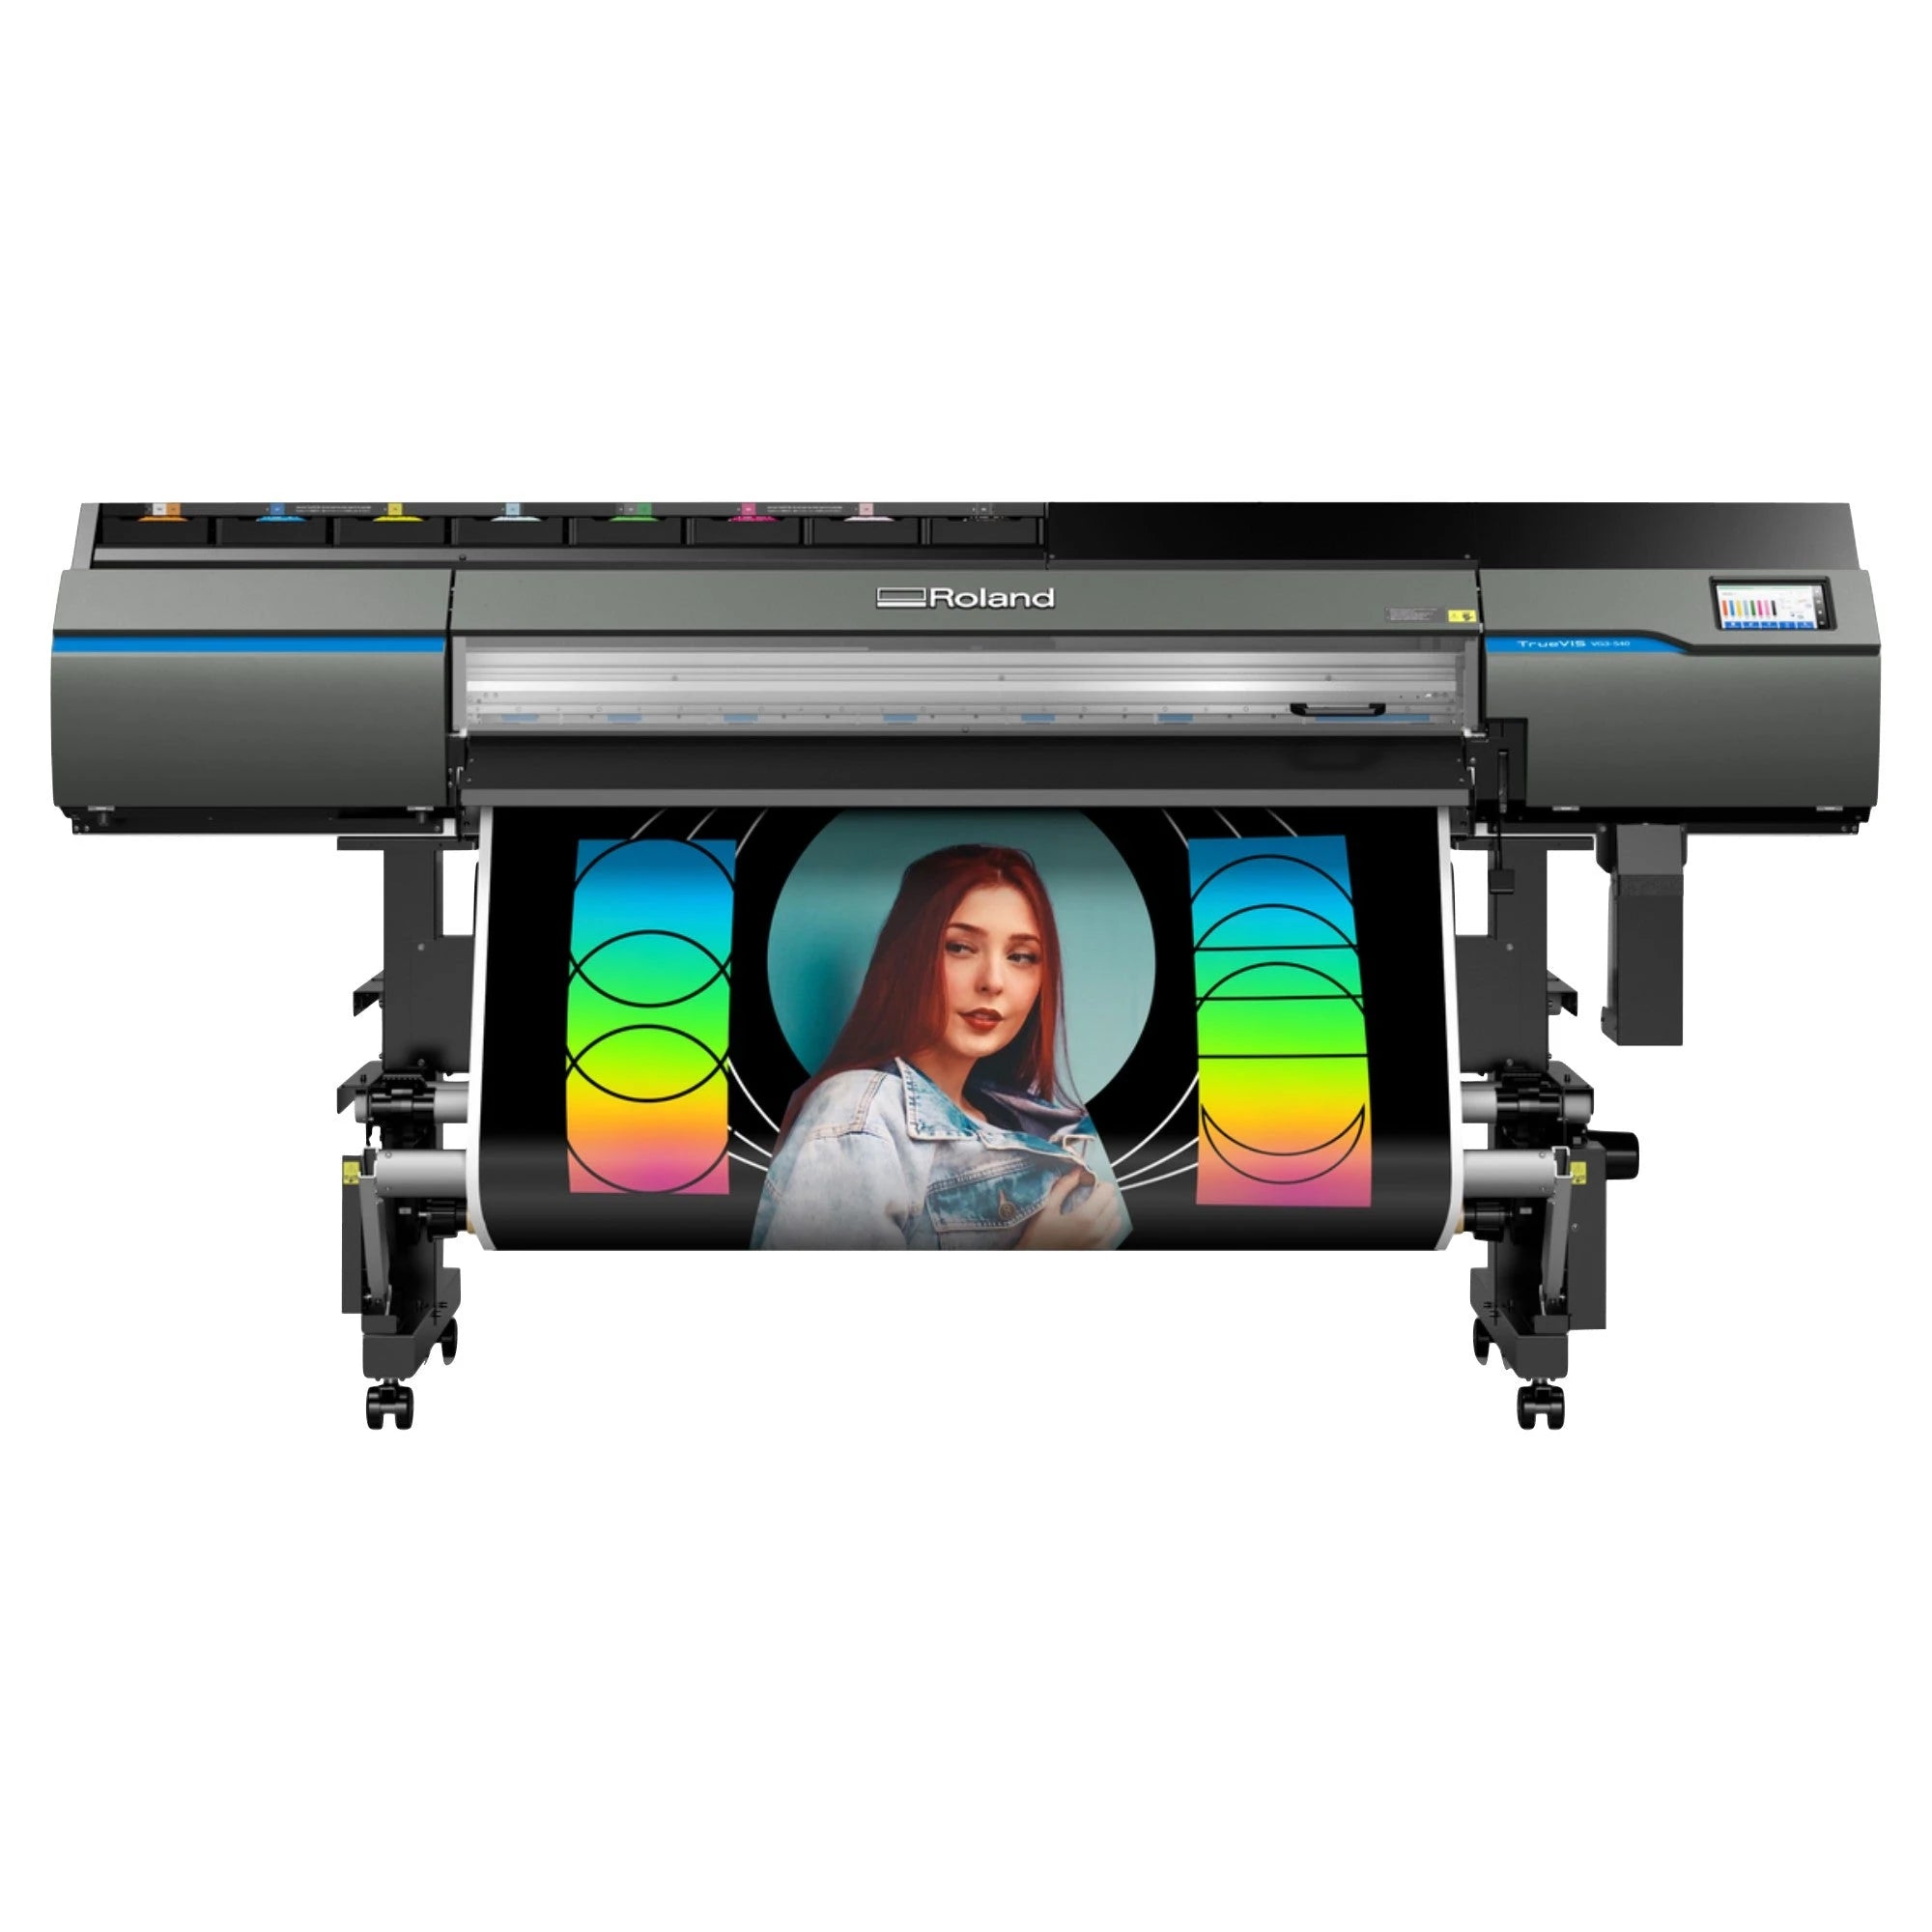 Absolute Toner $399/Month Roland TrueVIS VG3-640 64" Inches, Wide Format Inkjet Printer/Cutter (Print and Cut) With 7" LCD Touchscreen - Sale By Absolute Toner In Canada Large Format Printer